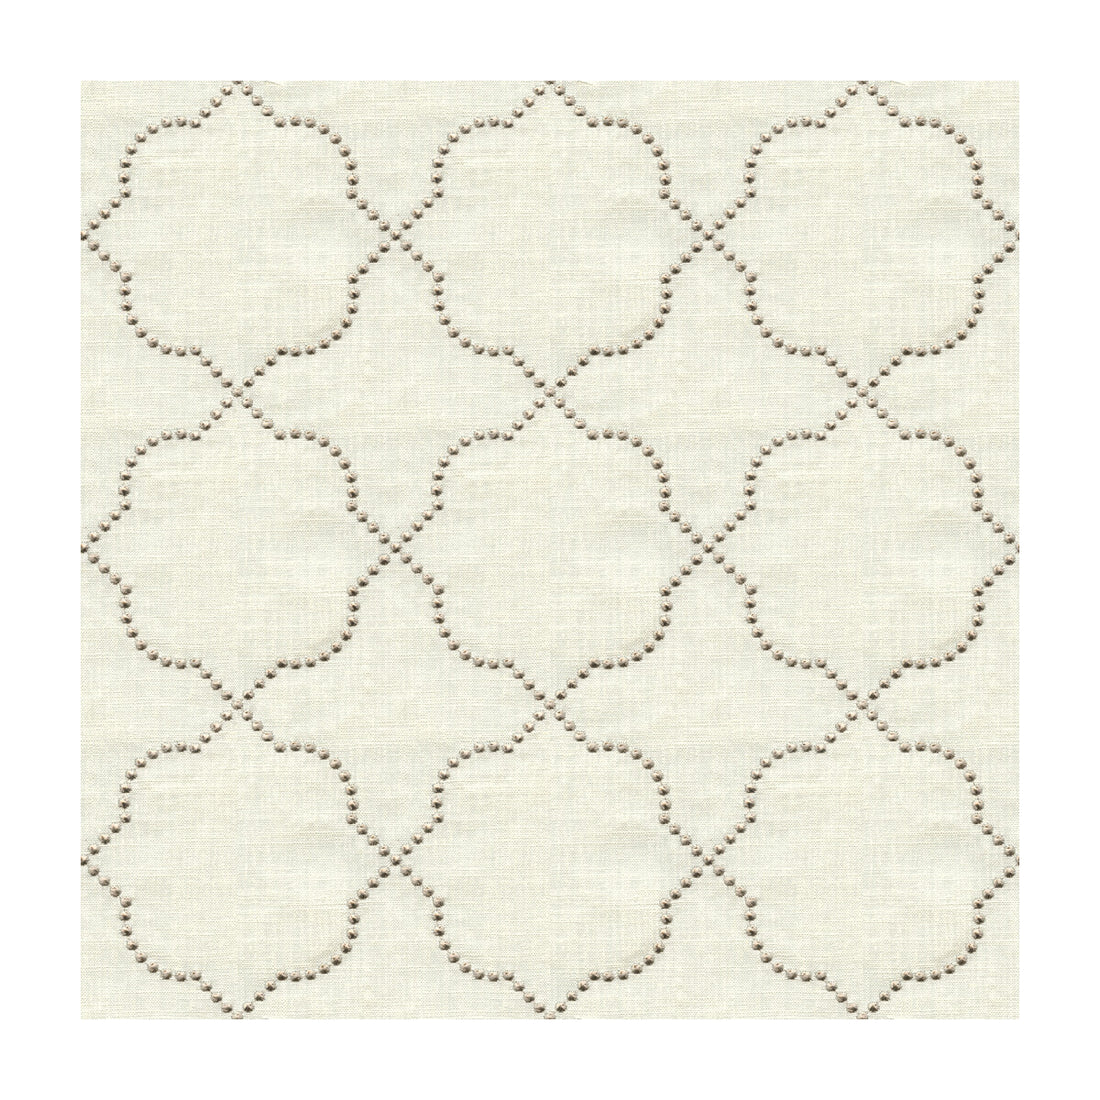 Tabari fabric in stone color - pattern 4072.11.0 - by Kravet Design in the Constantinople collection